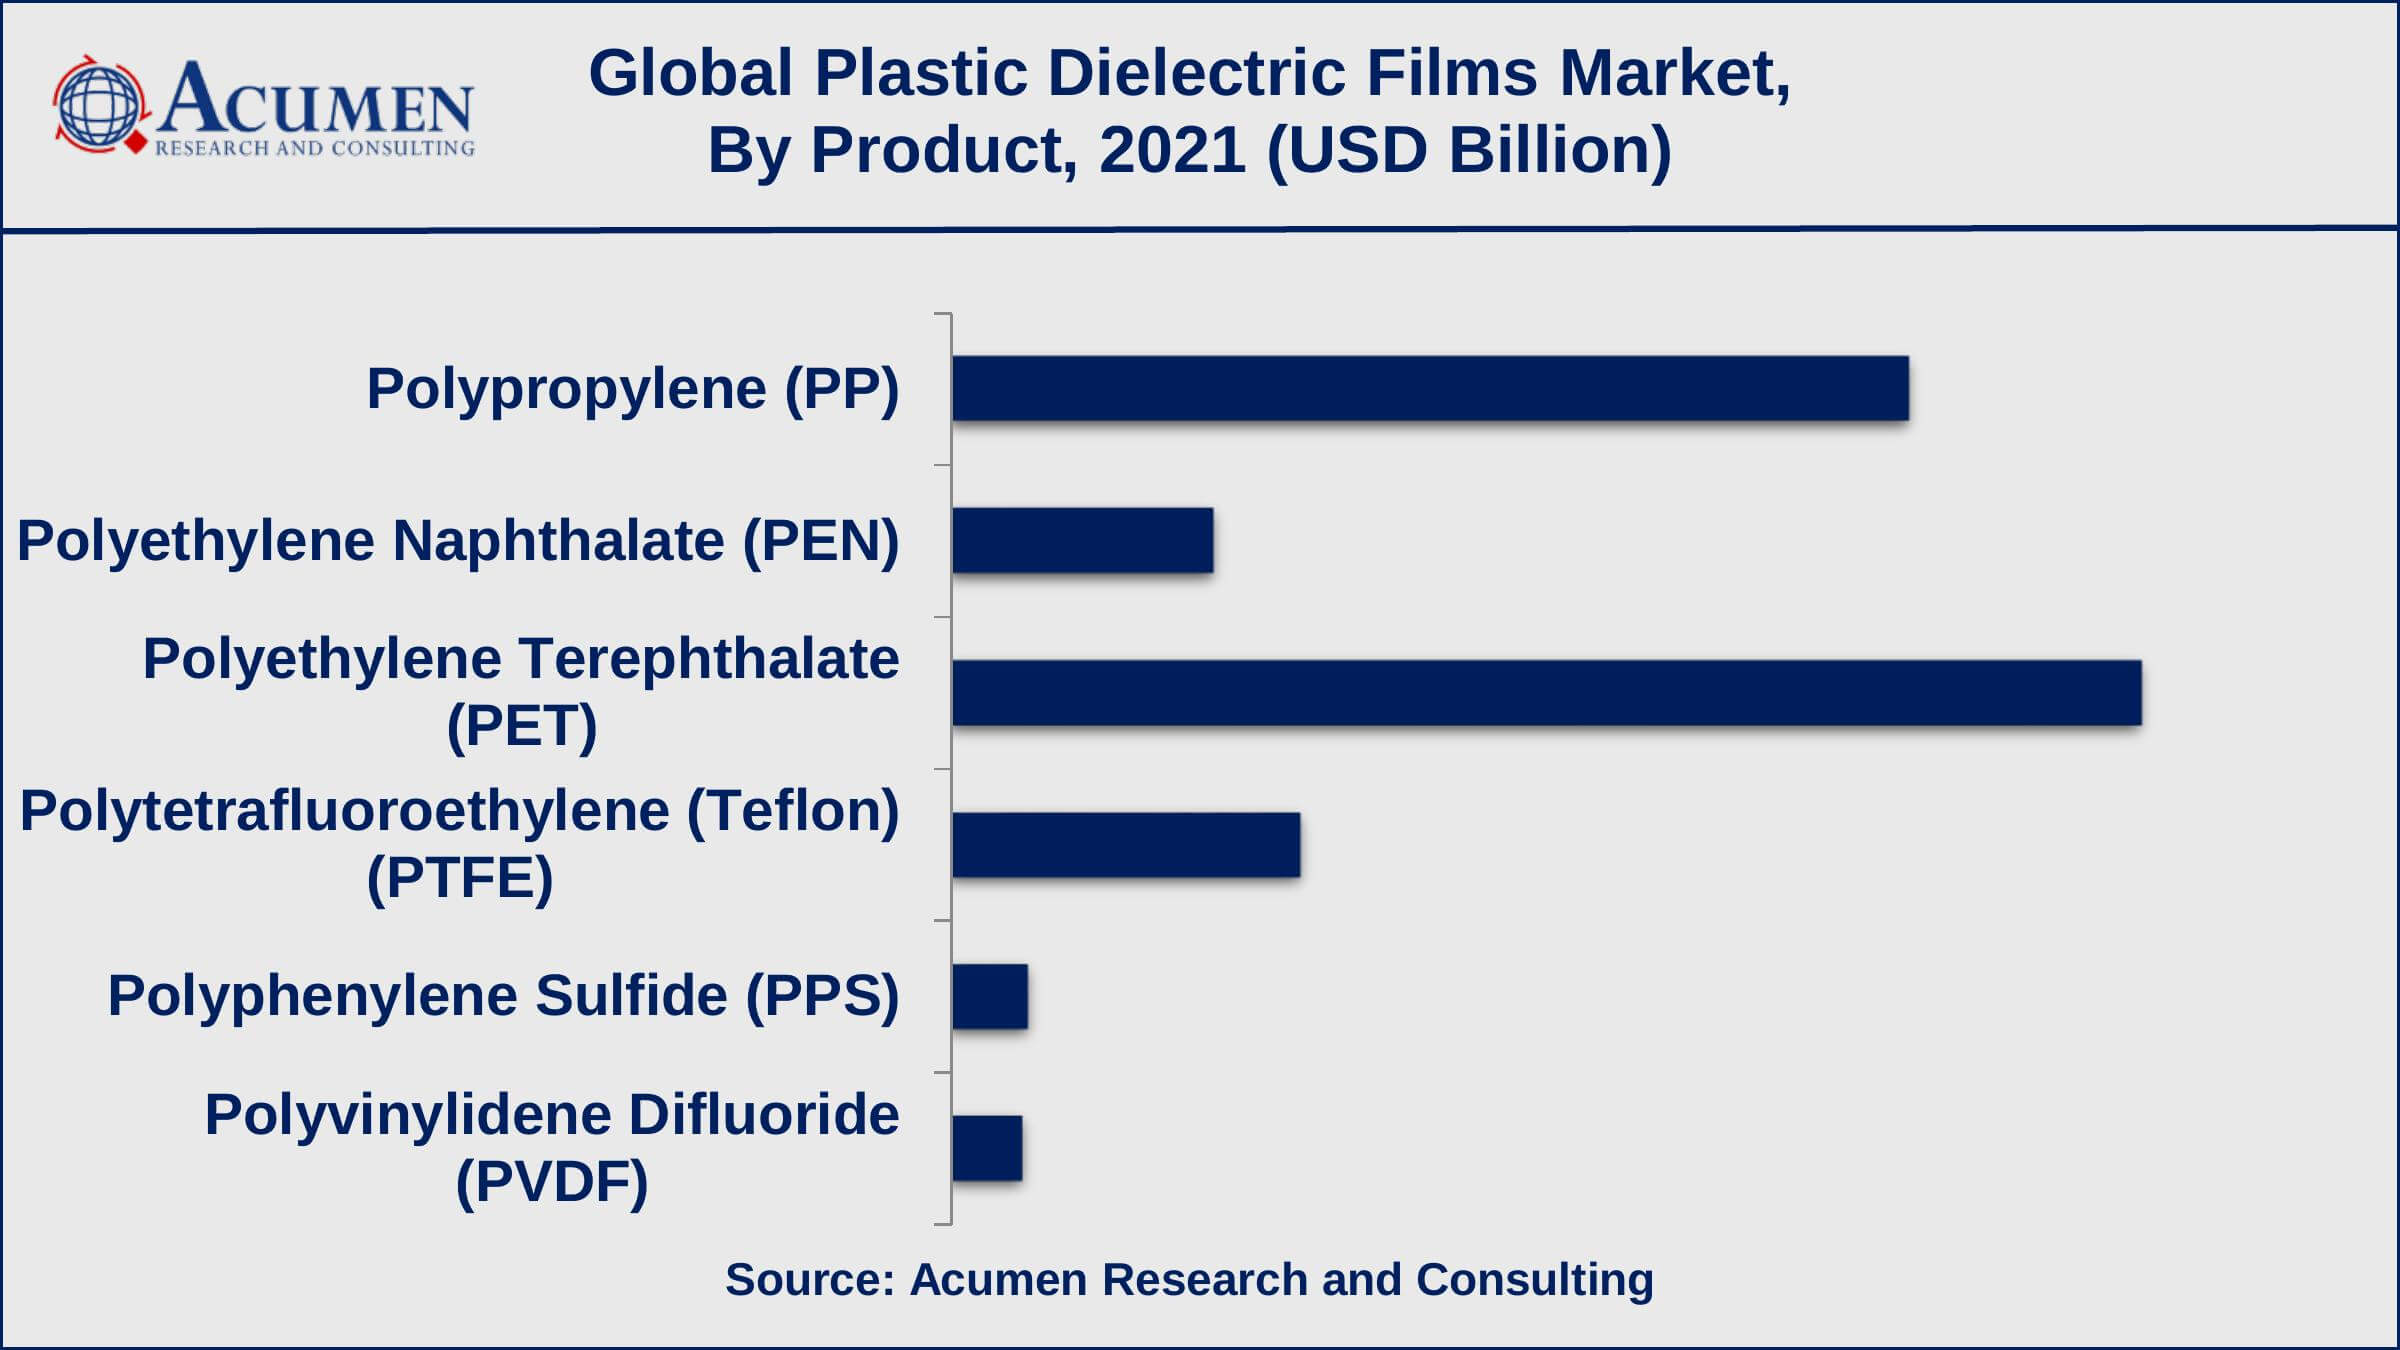 Based on product, polyethylene terephthalate (PET) recorded 41% of the overall market share in 2021